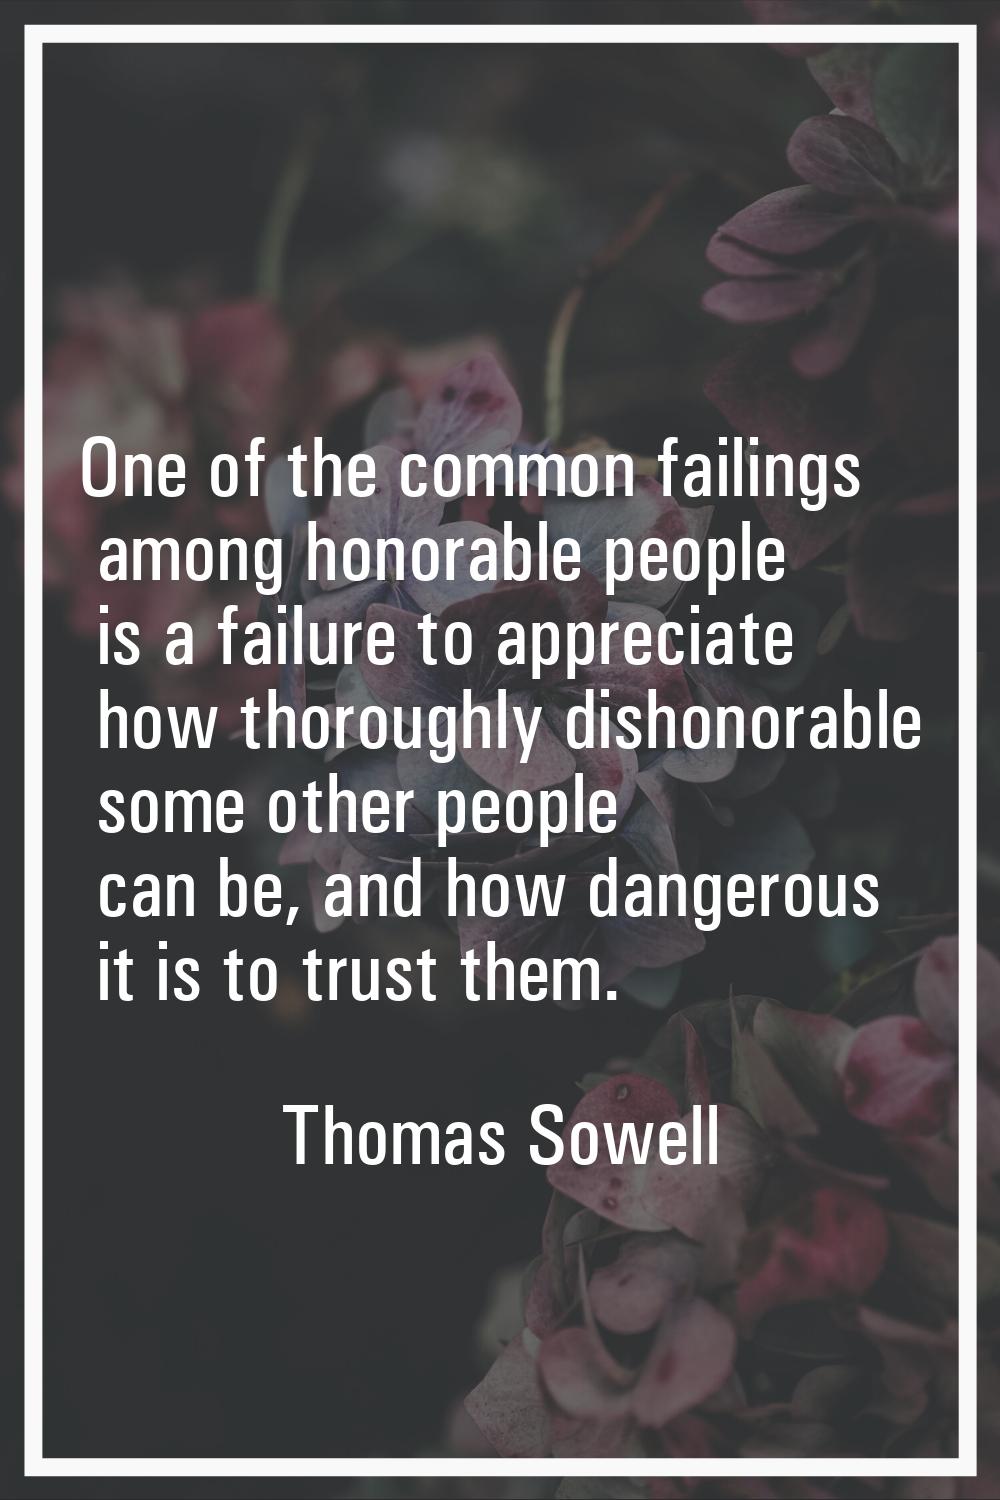 One of the common failings among honorable people is a failure to appreciate how thoroughly dishono